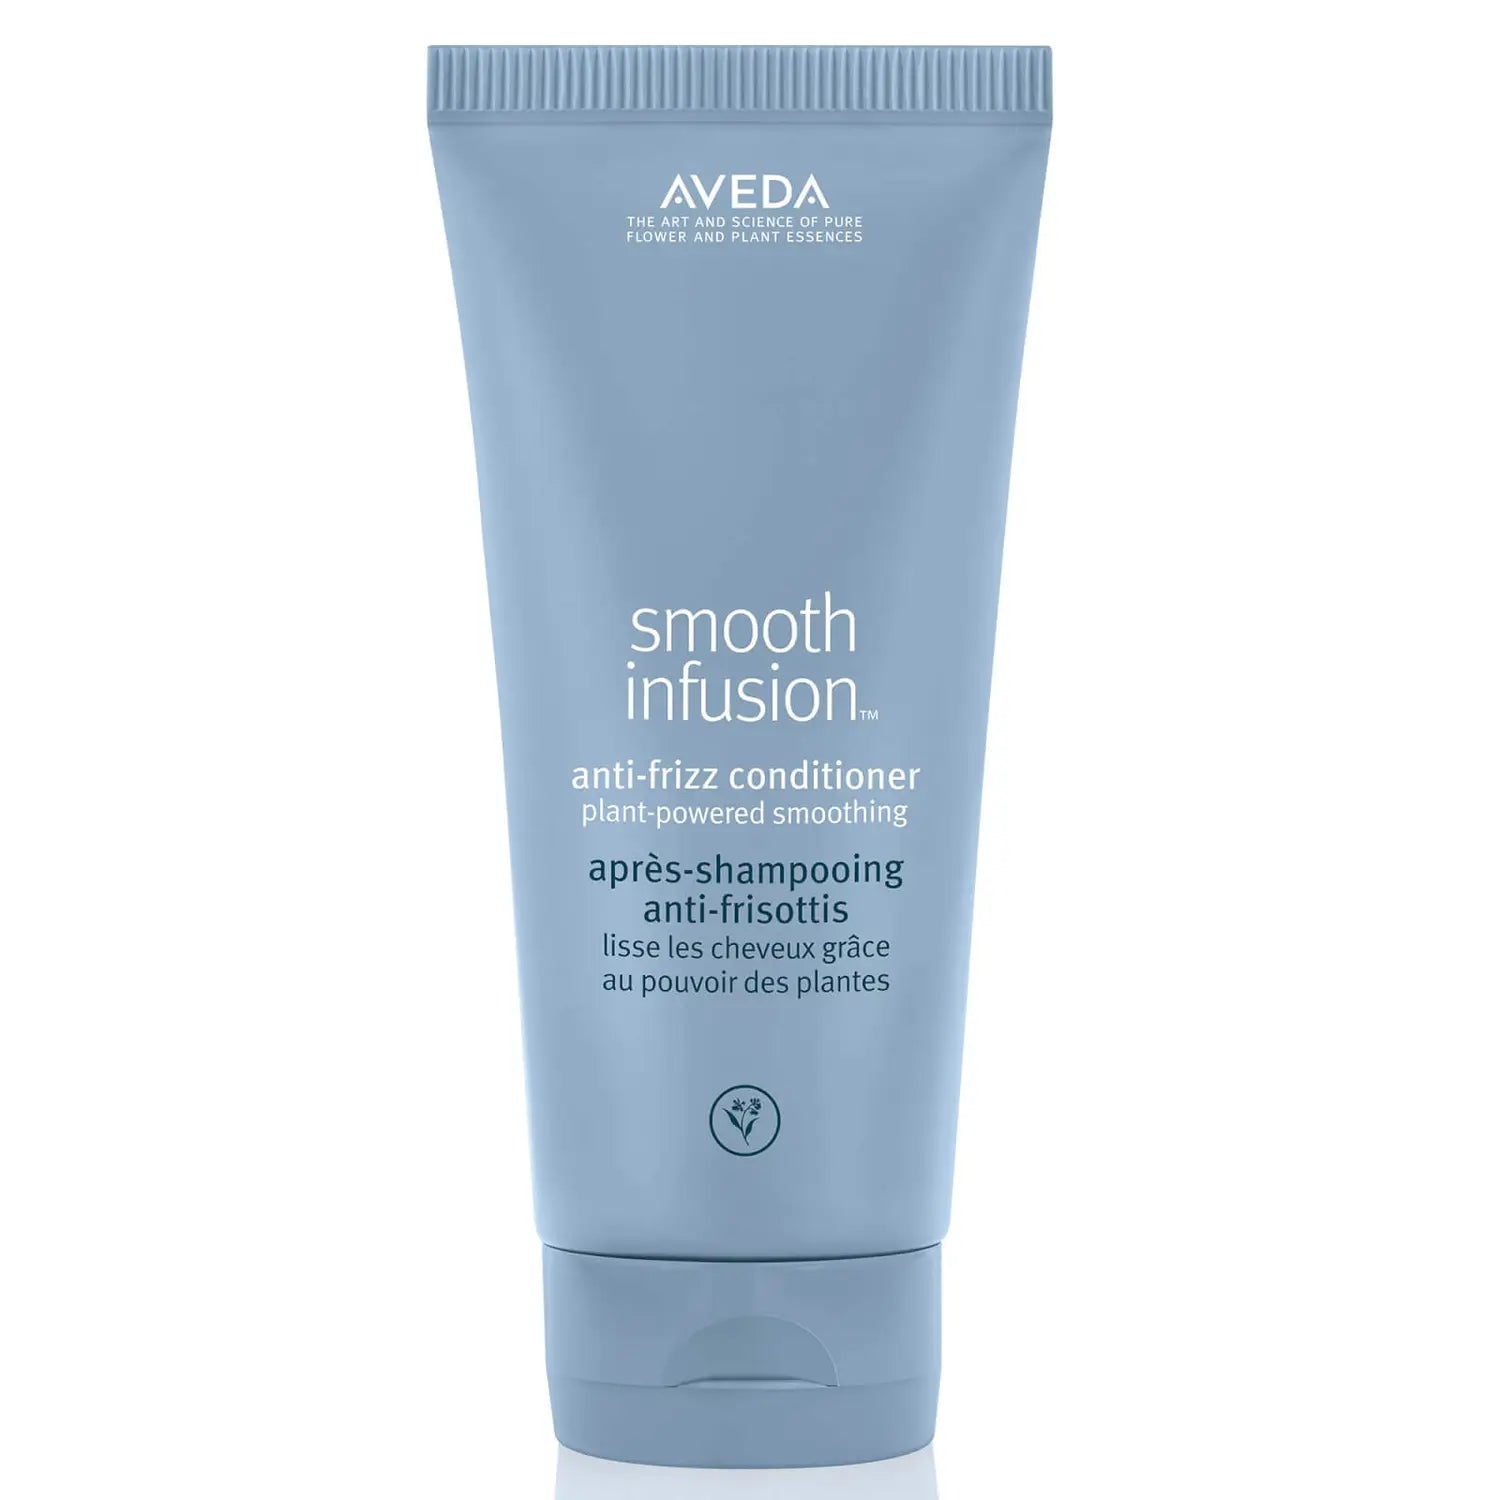 Aveda Smooth Infusion Anti-frizz Conditioner 200ml